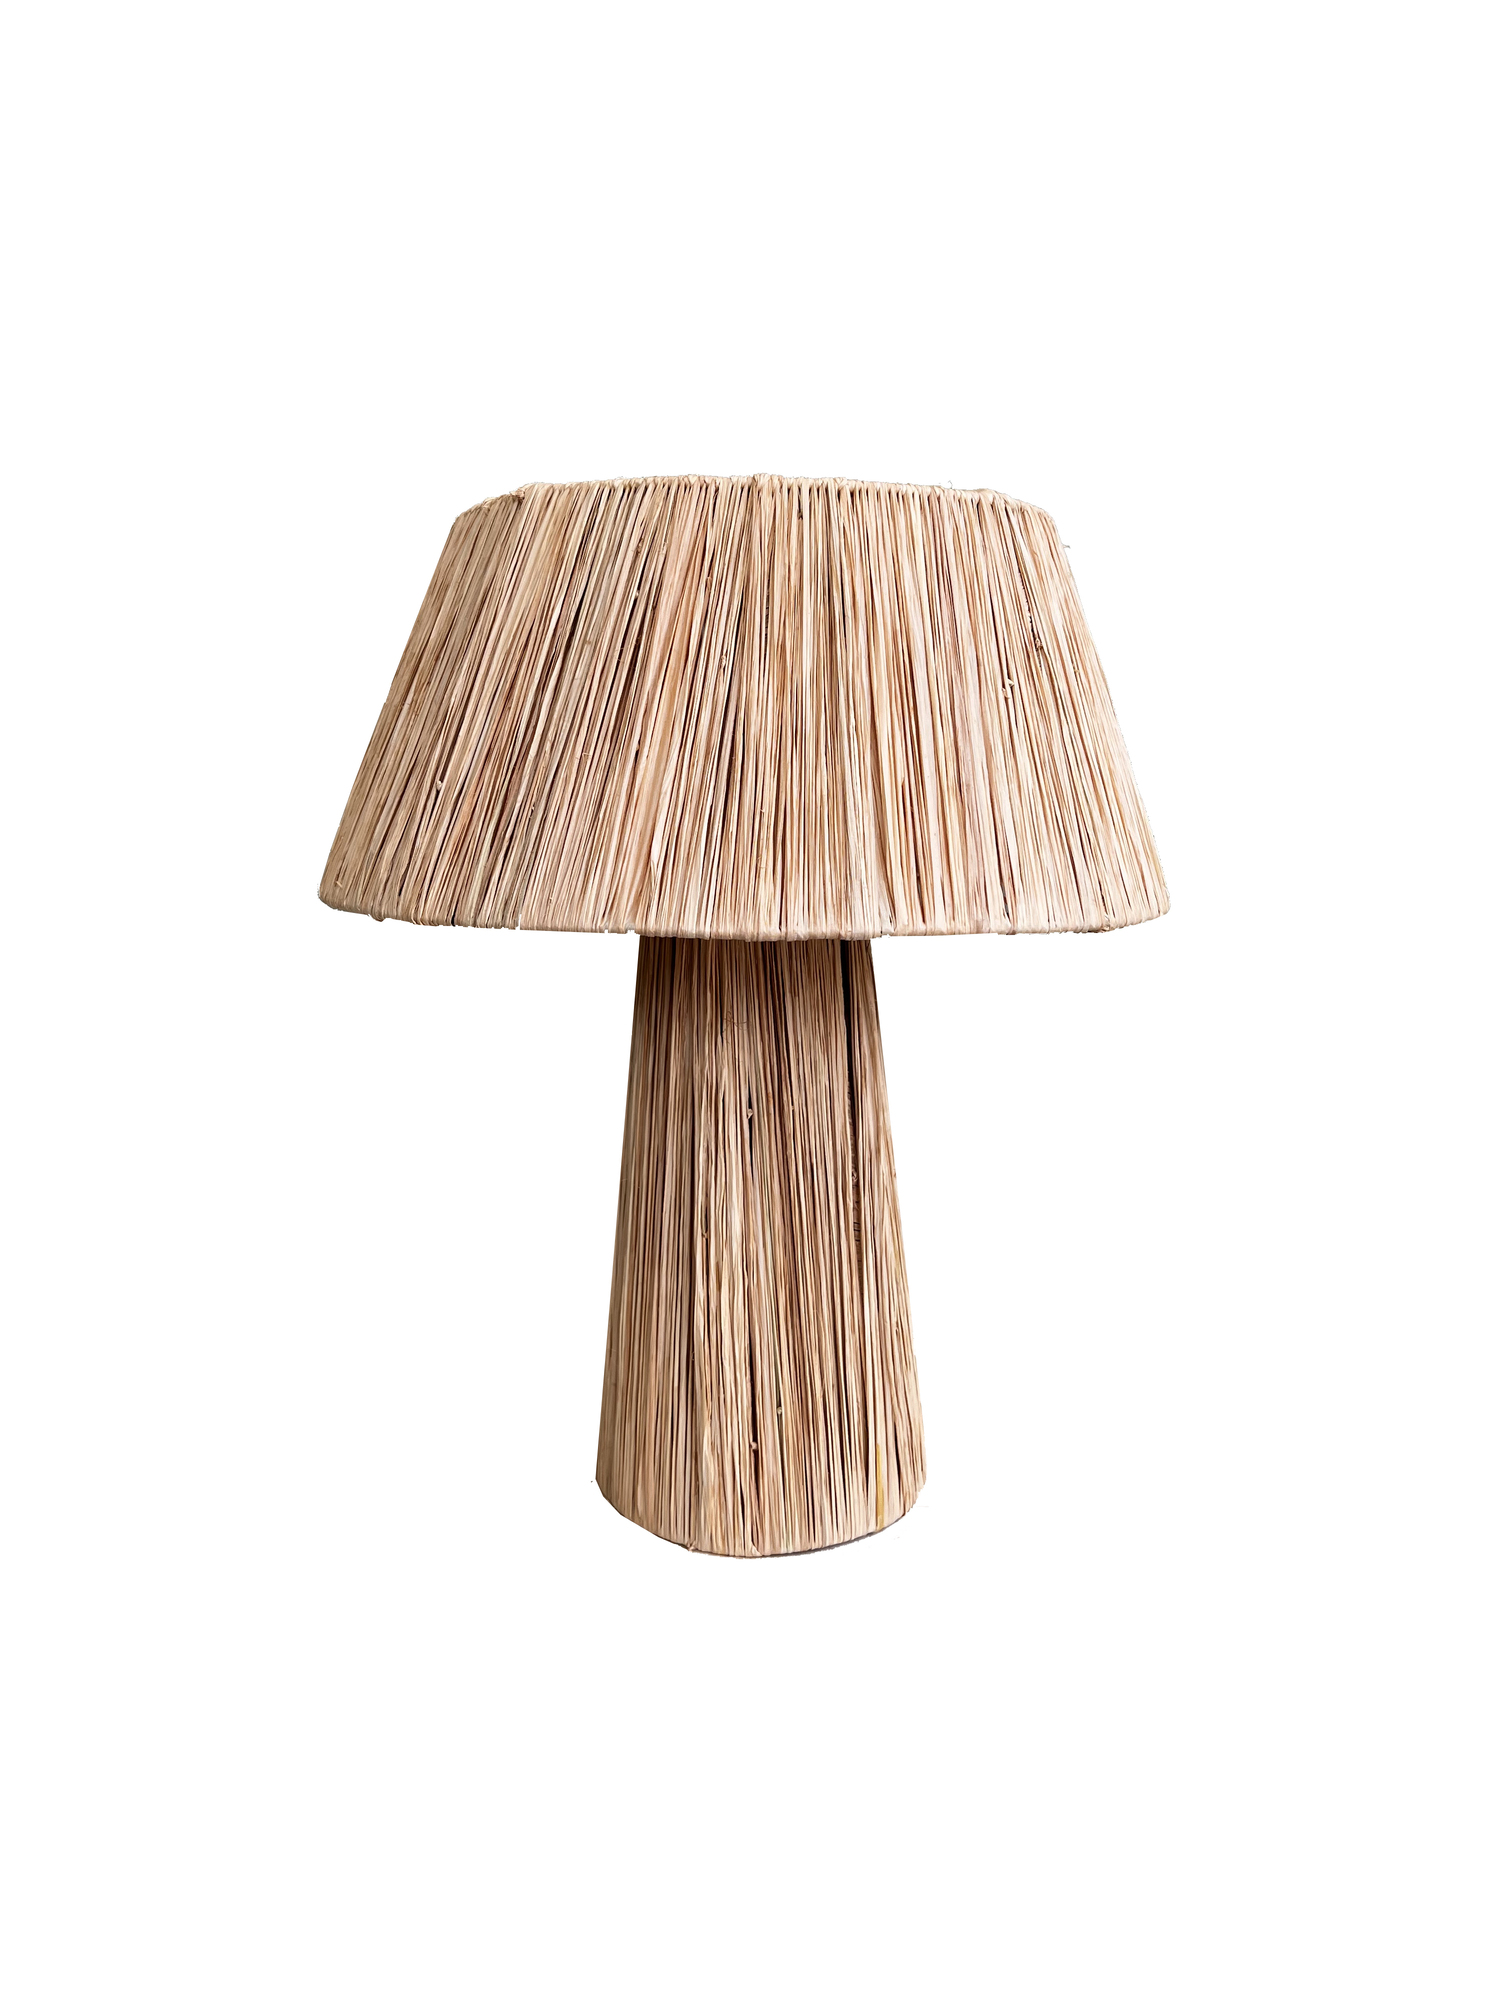 straw table lamp small